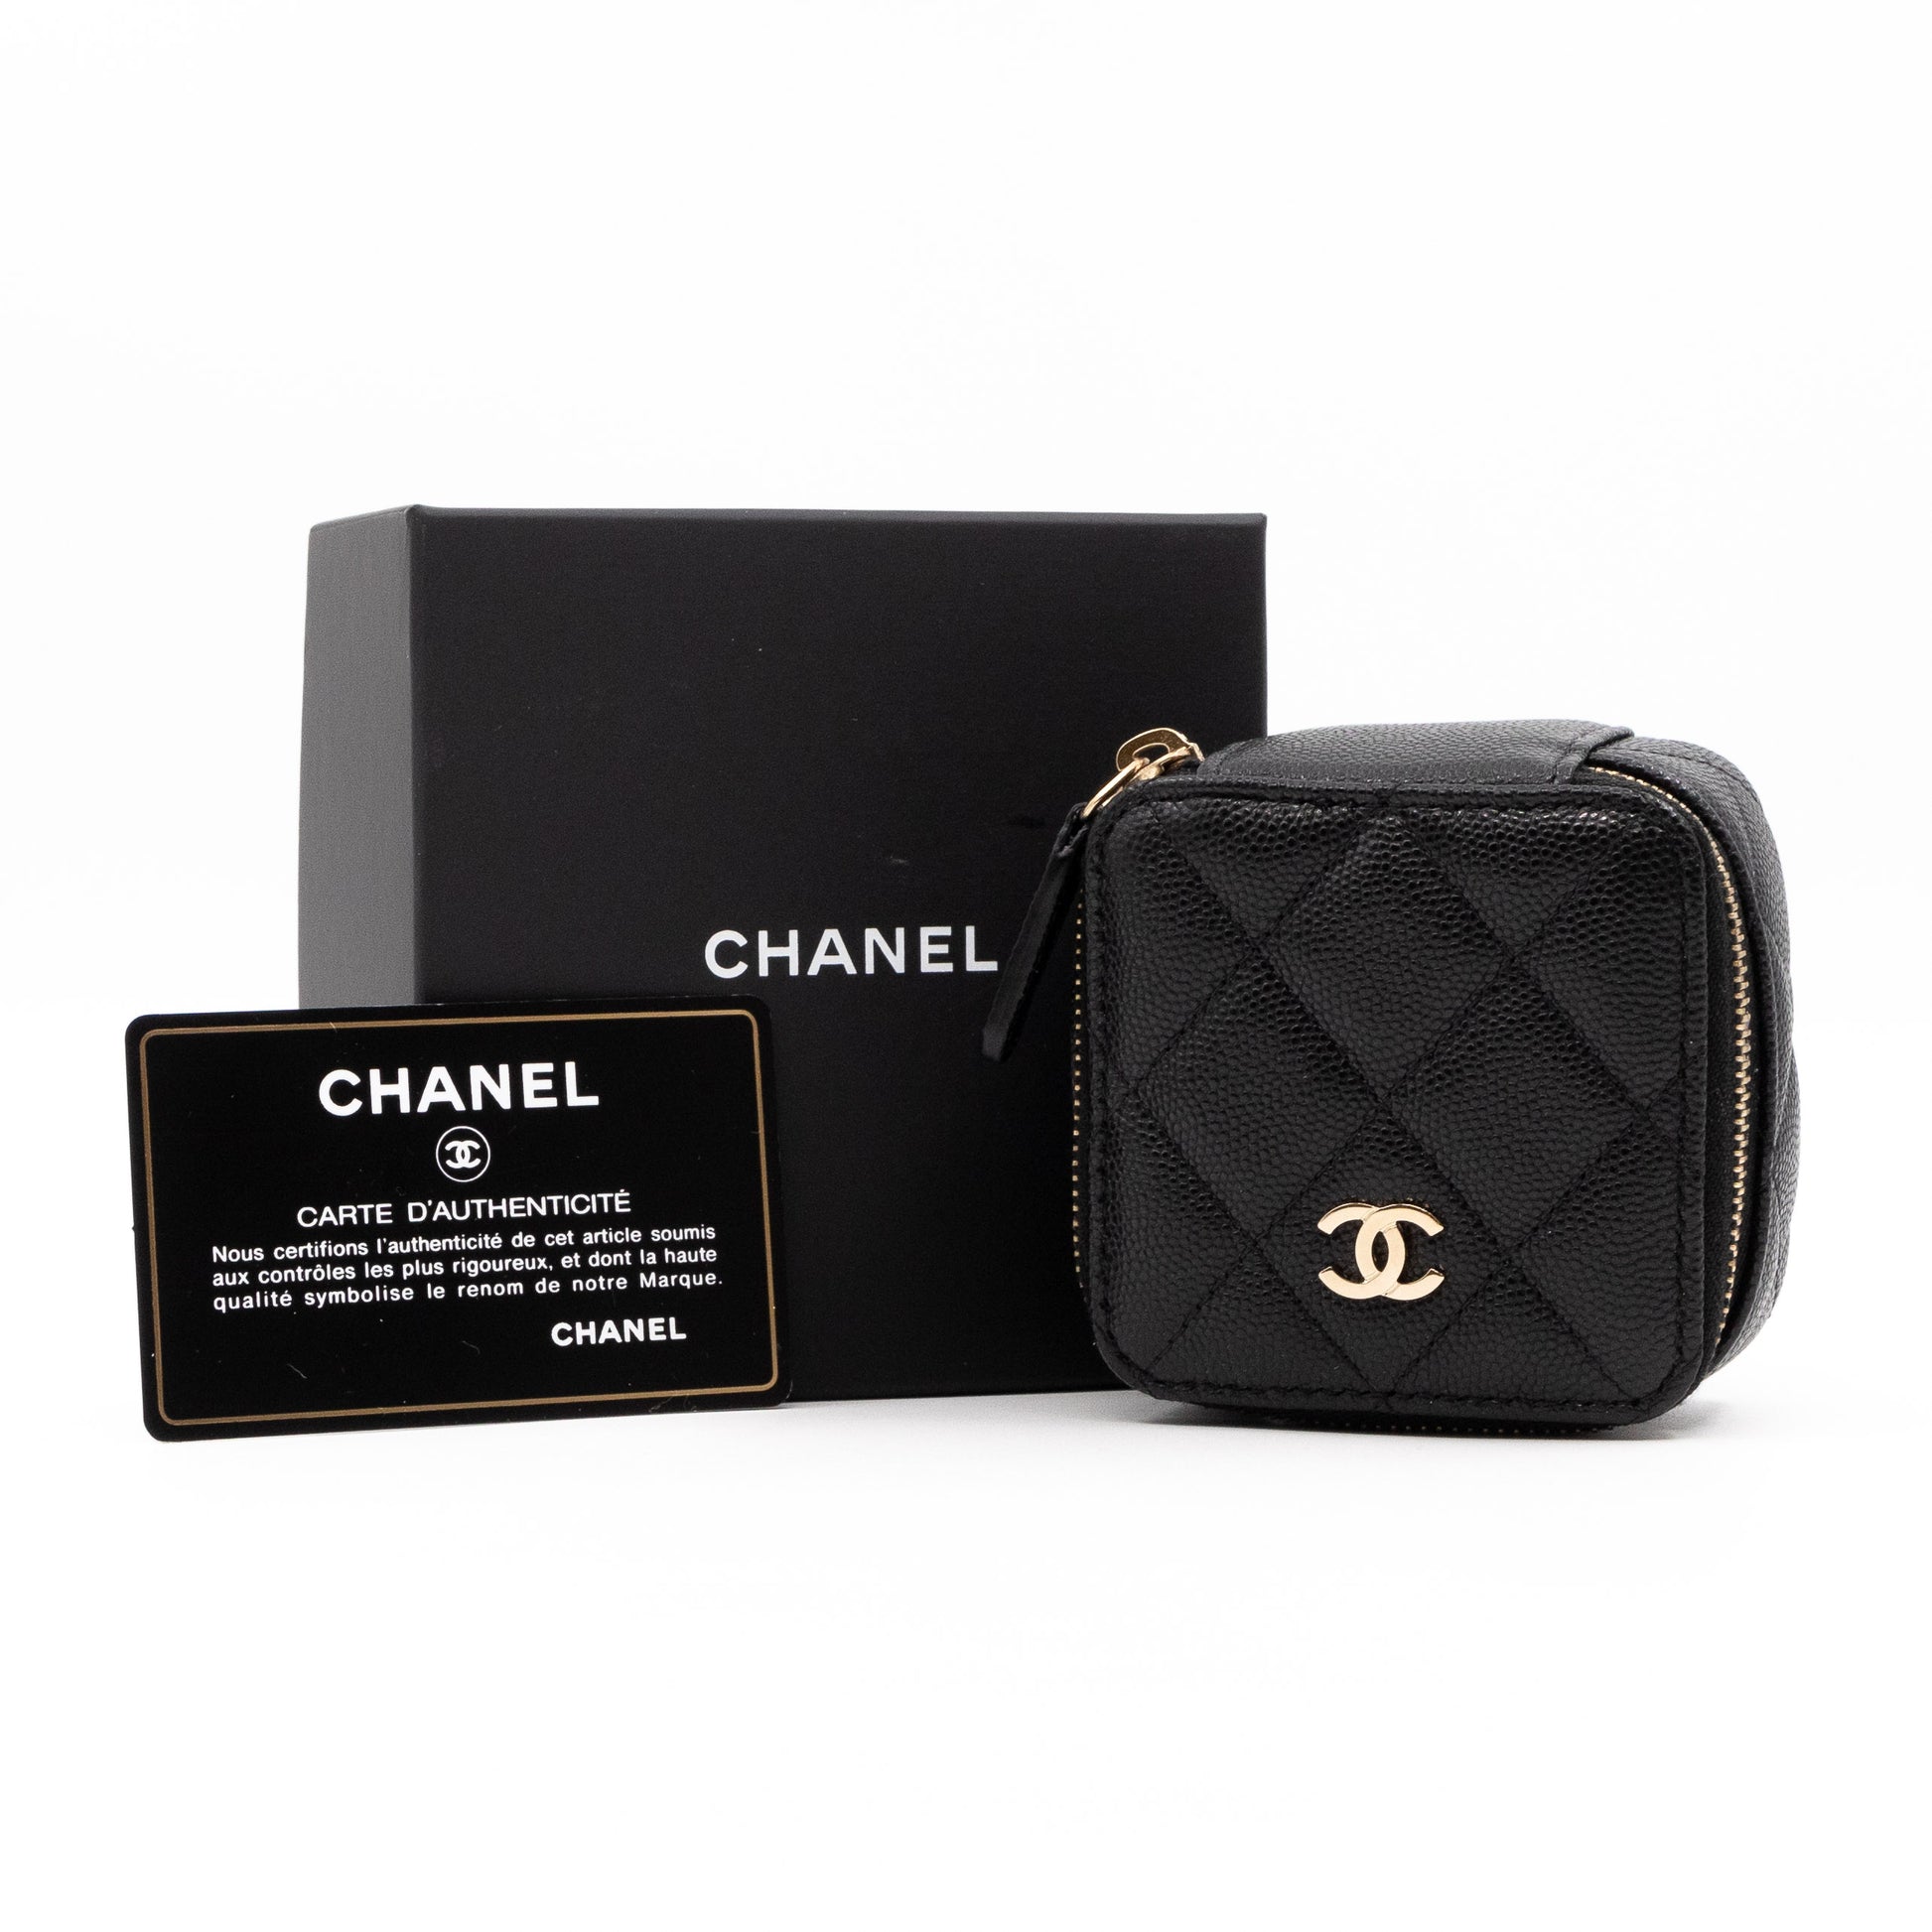 CHANEL New travel line Pouch Jewelry case accessory case Canvas Black